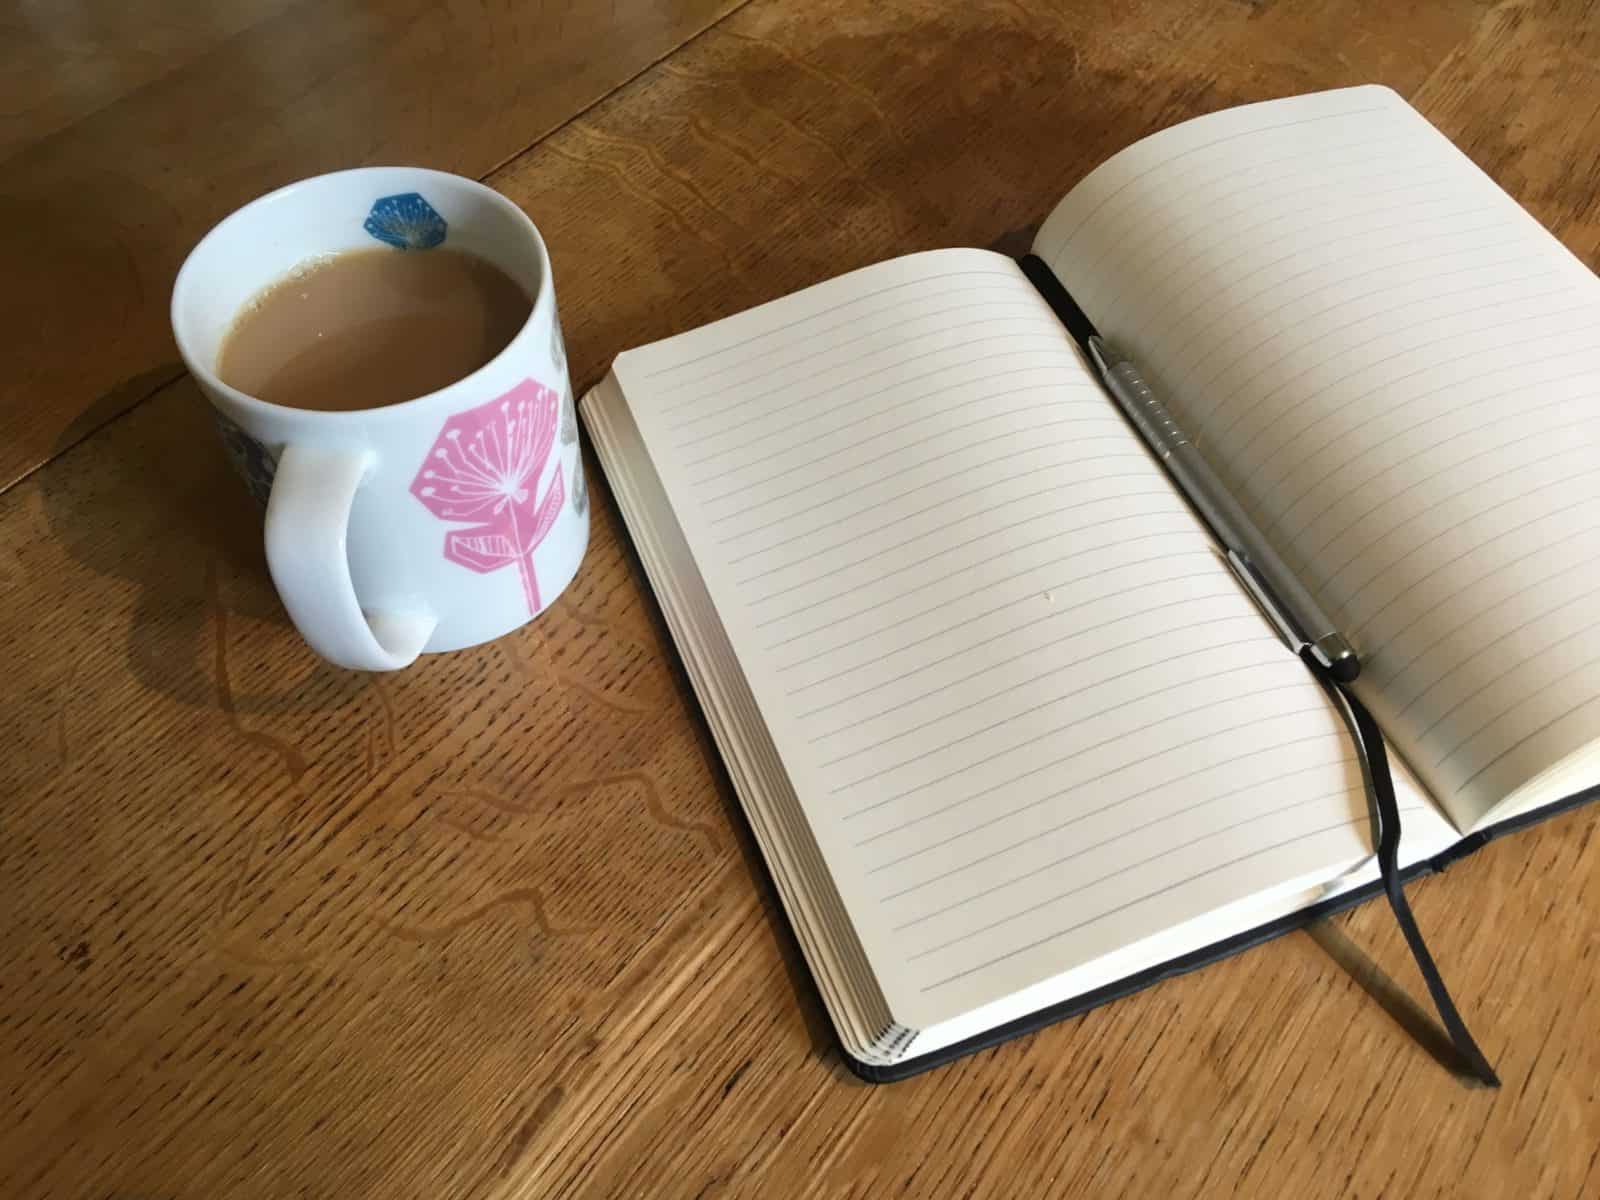 A cup of tea and a notebook and pen